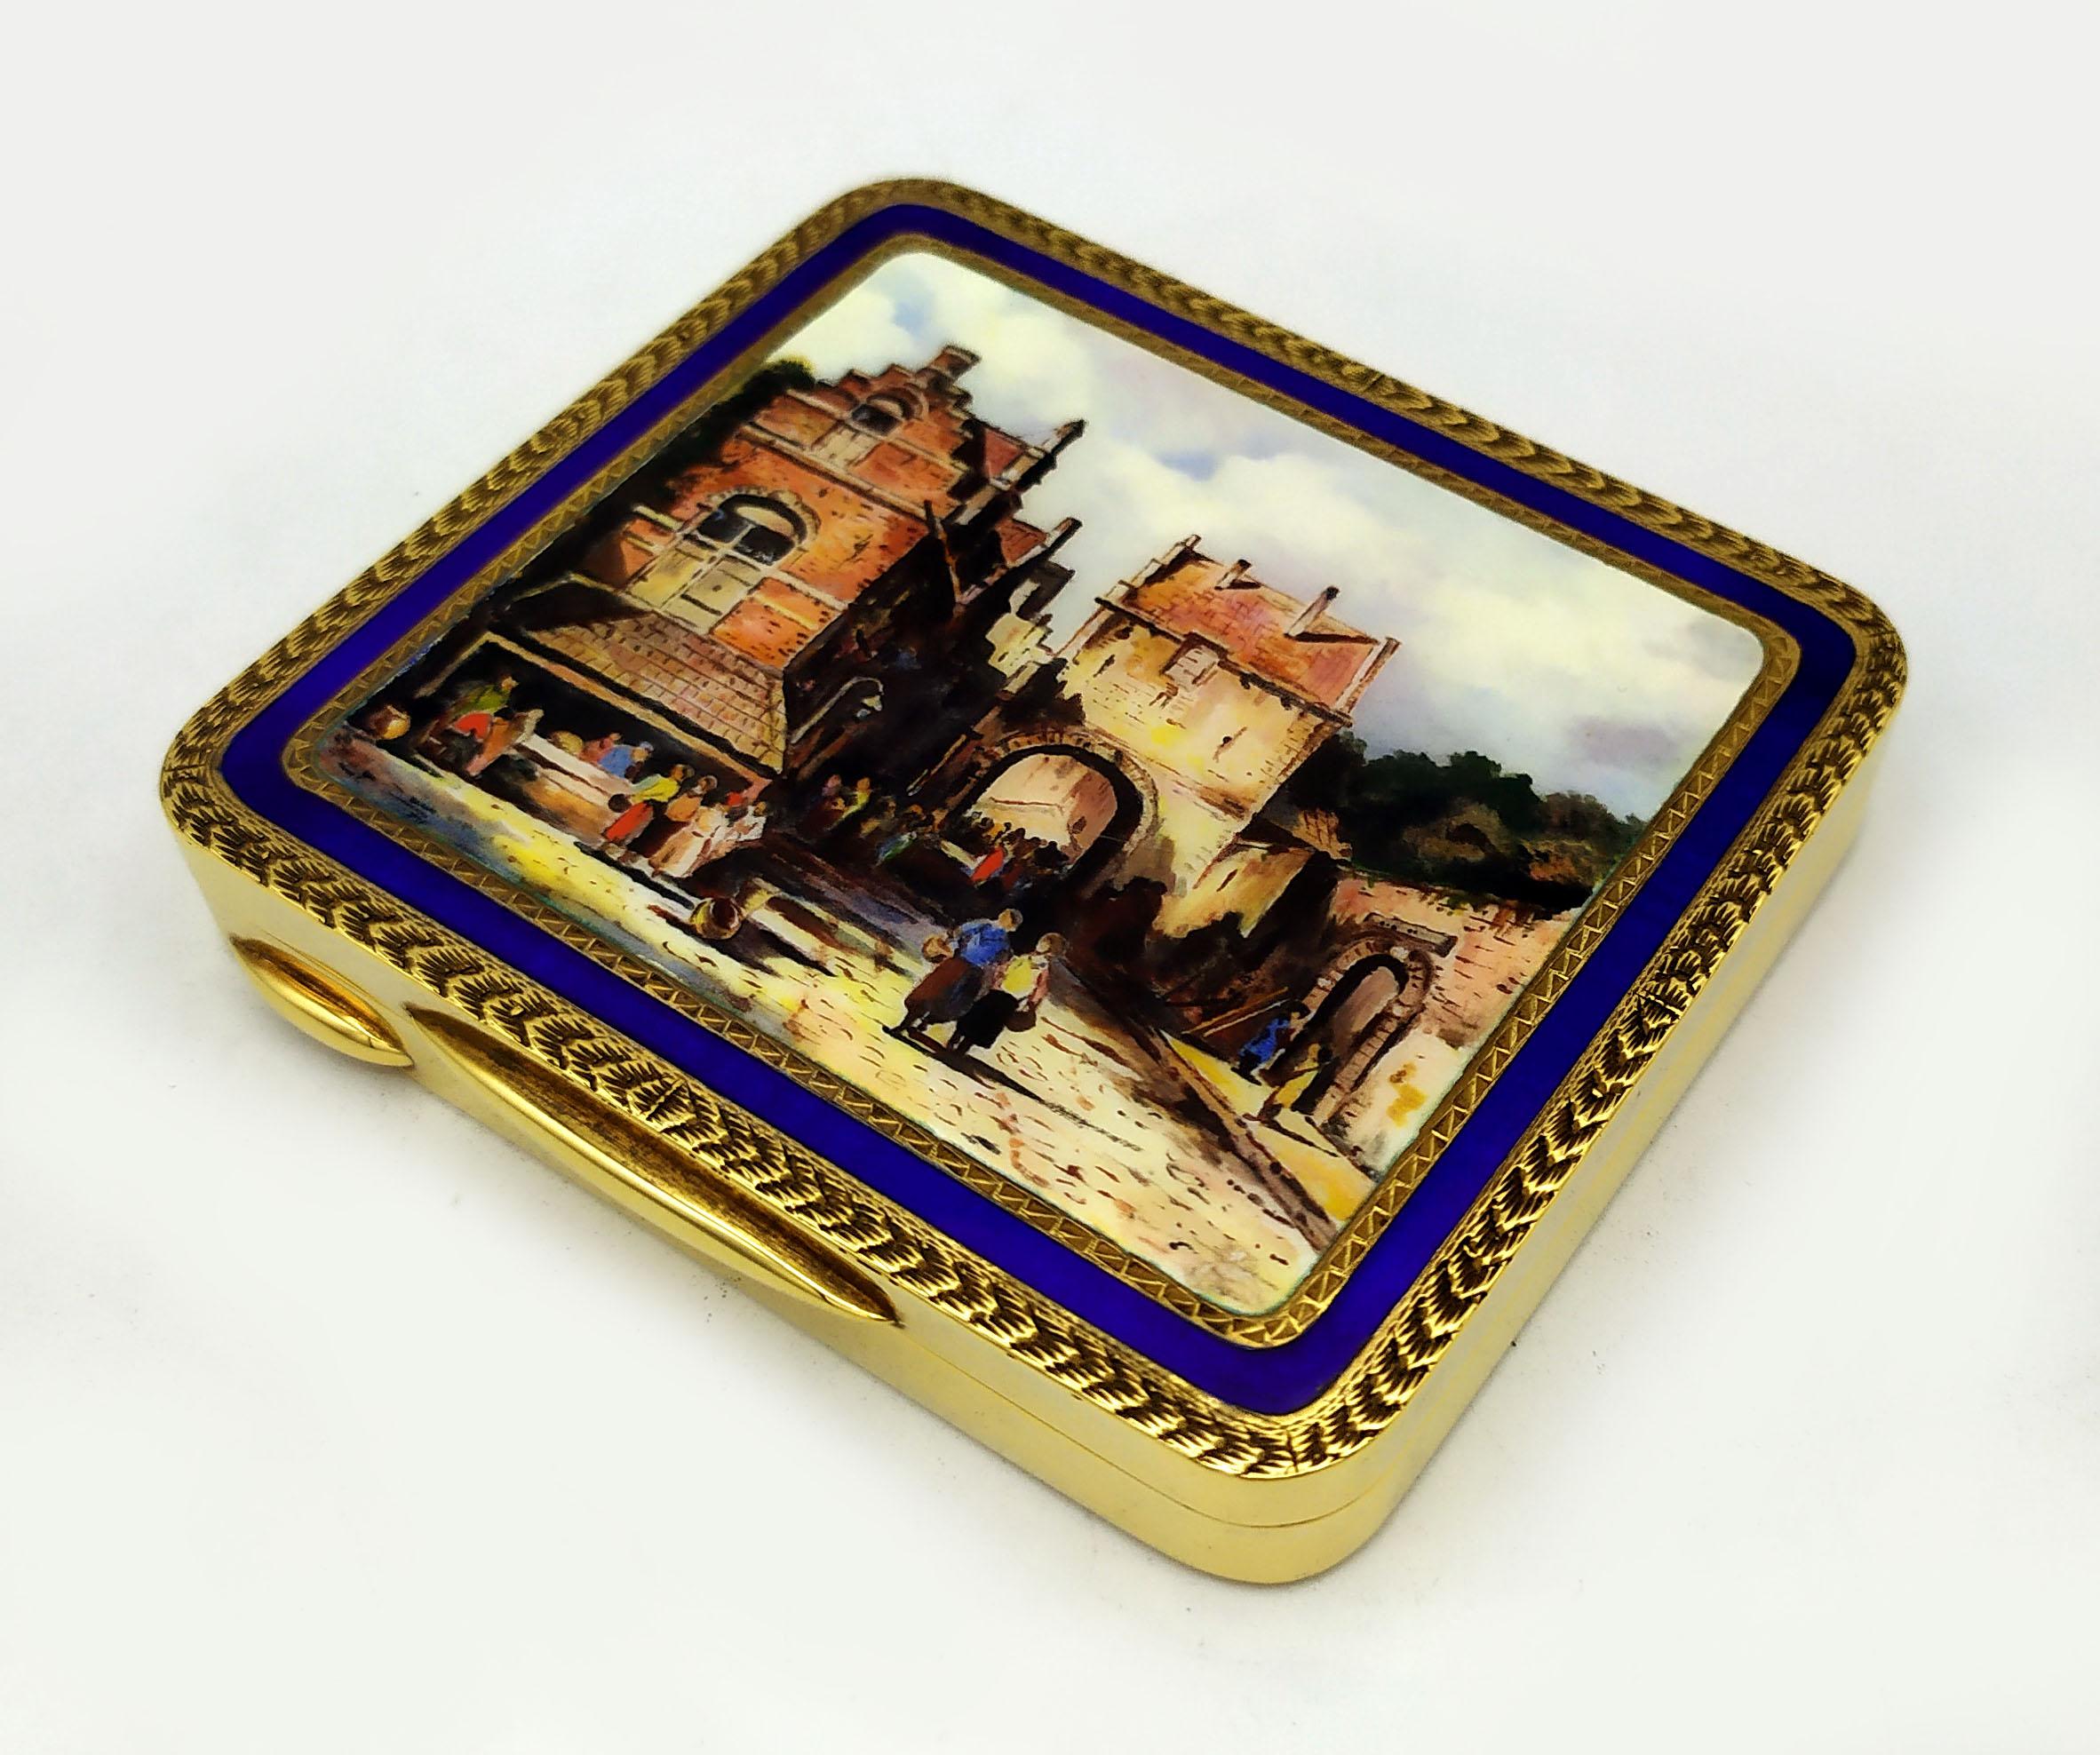 Baroque Snuff Box reproducing the painting of a Roman glimpse late 1800s Salimbeni For Sale